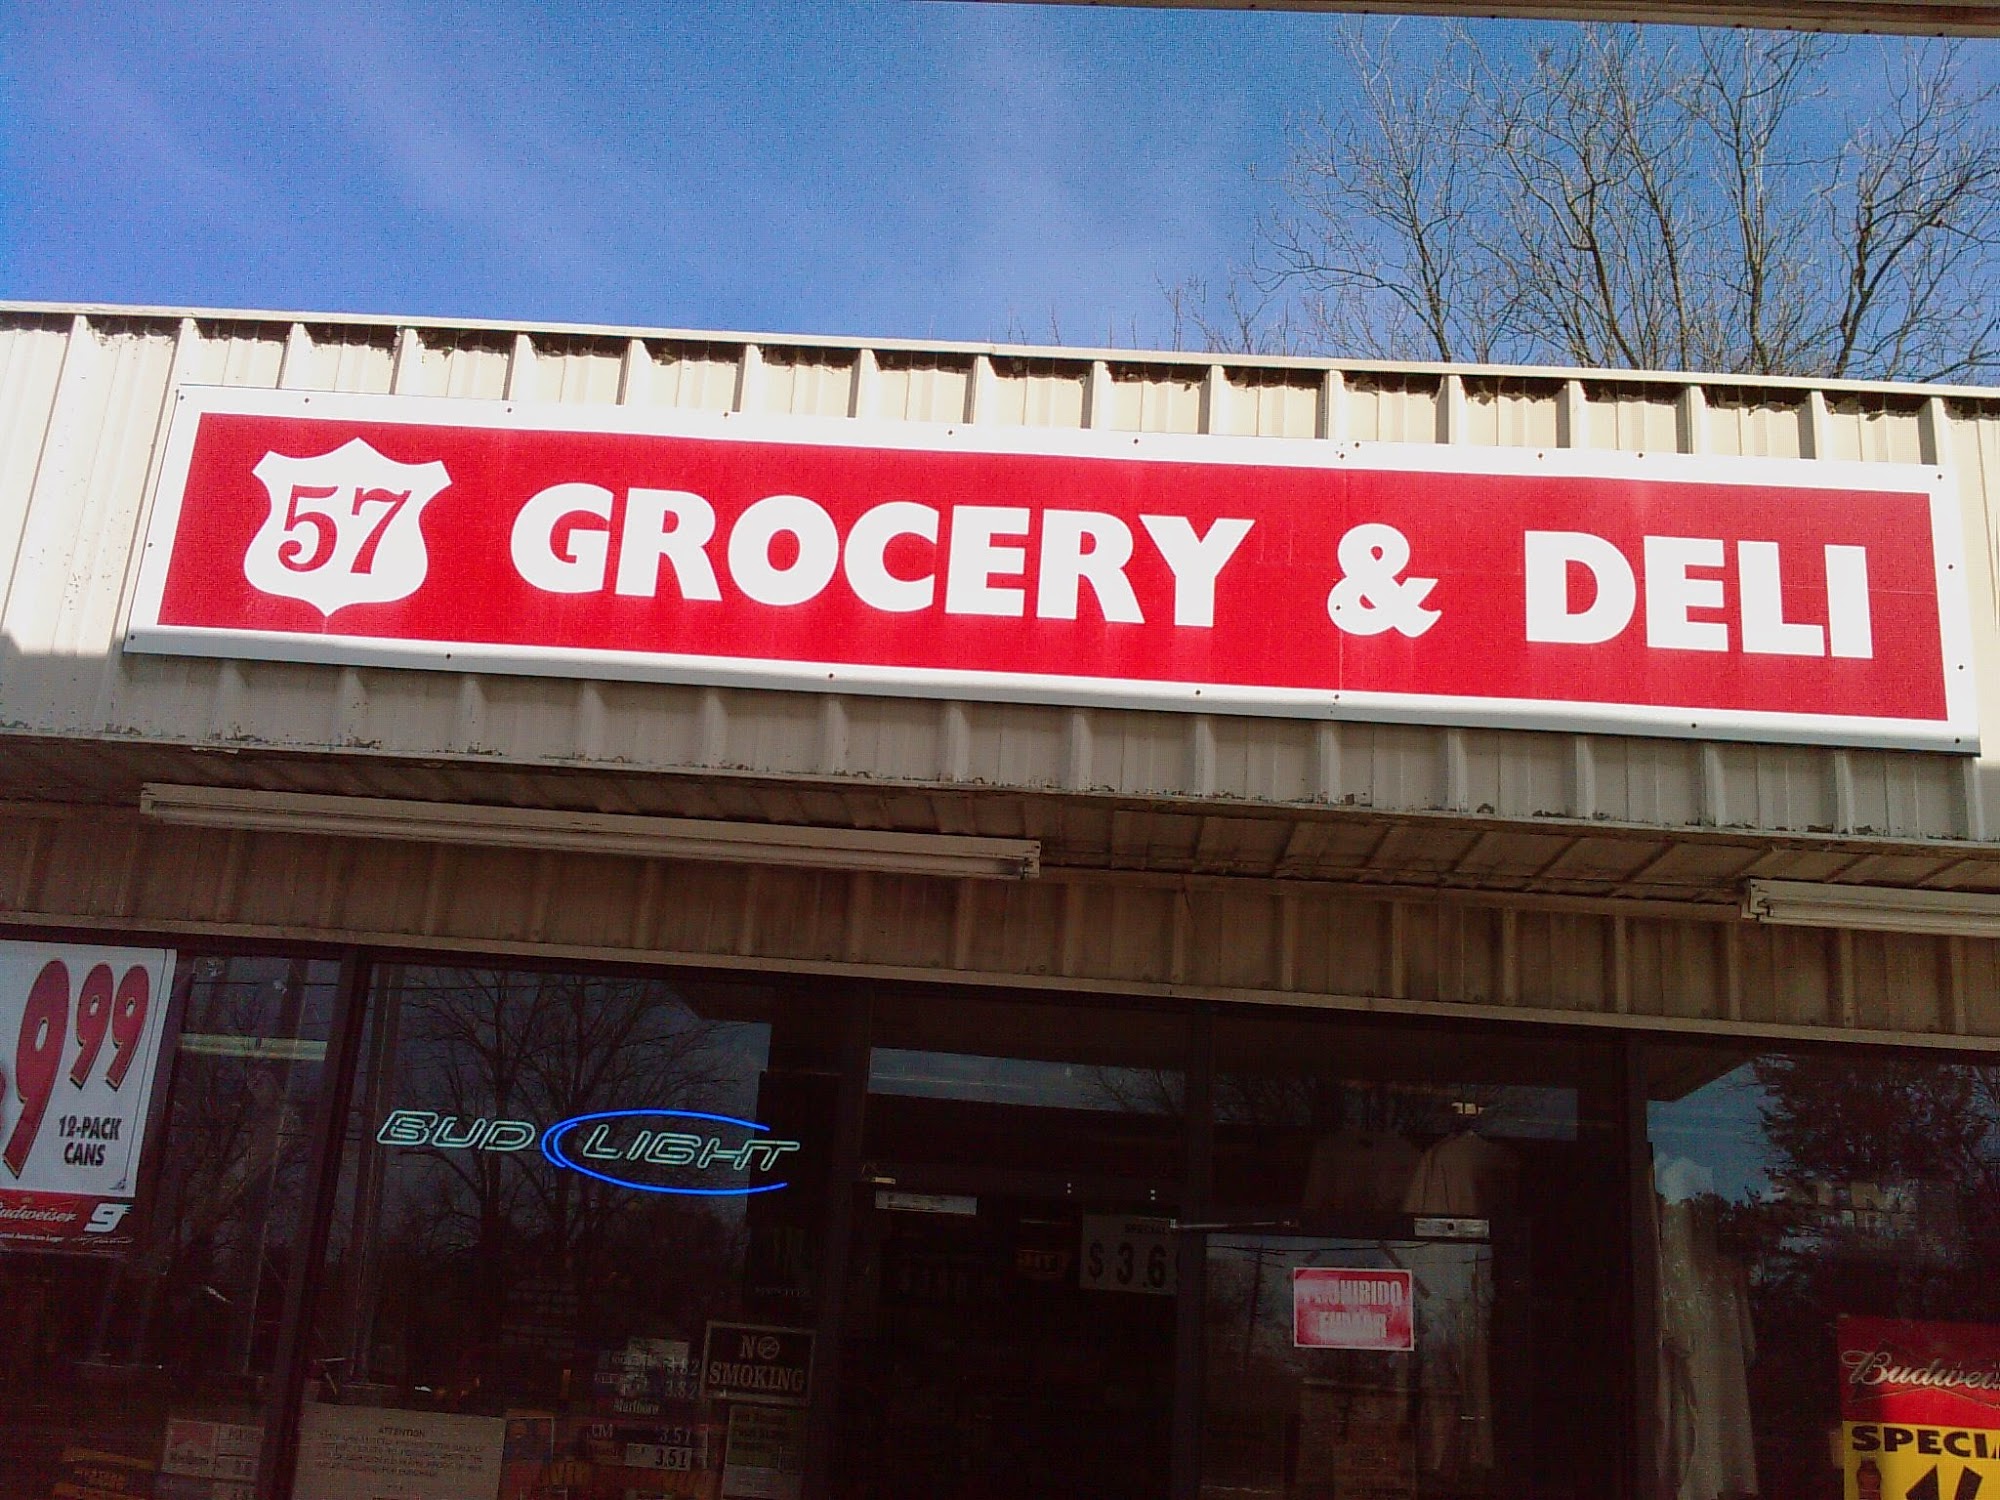 Highway 57 Grocery and Deli